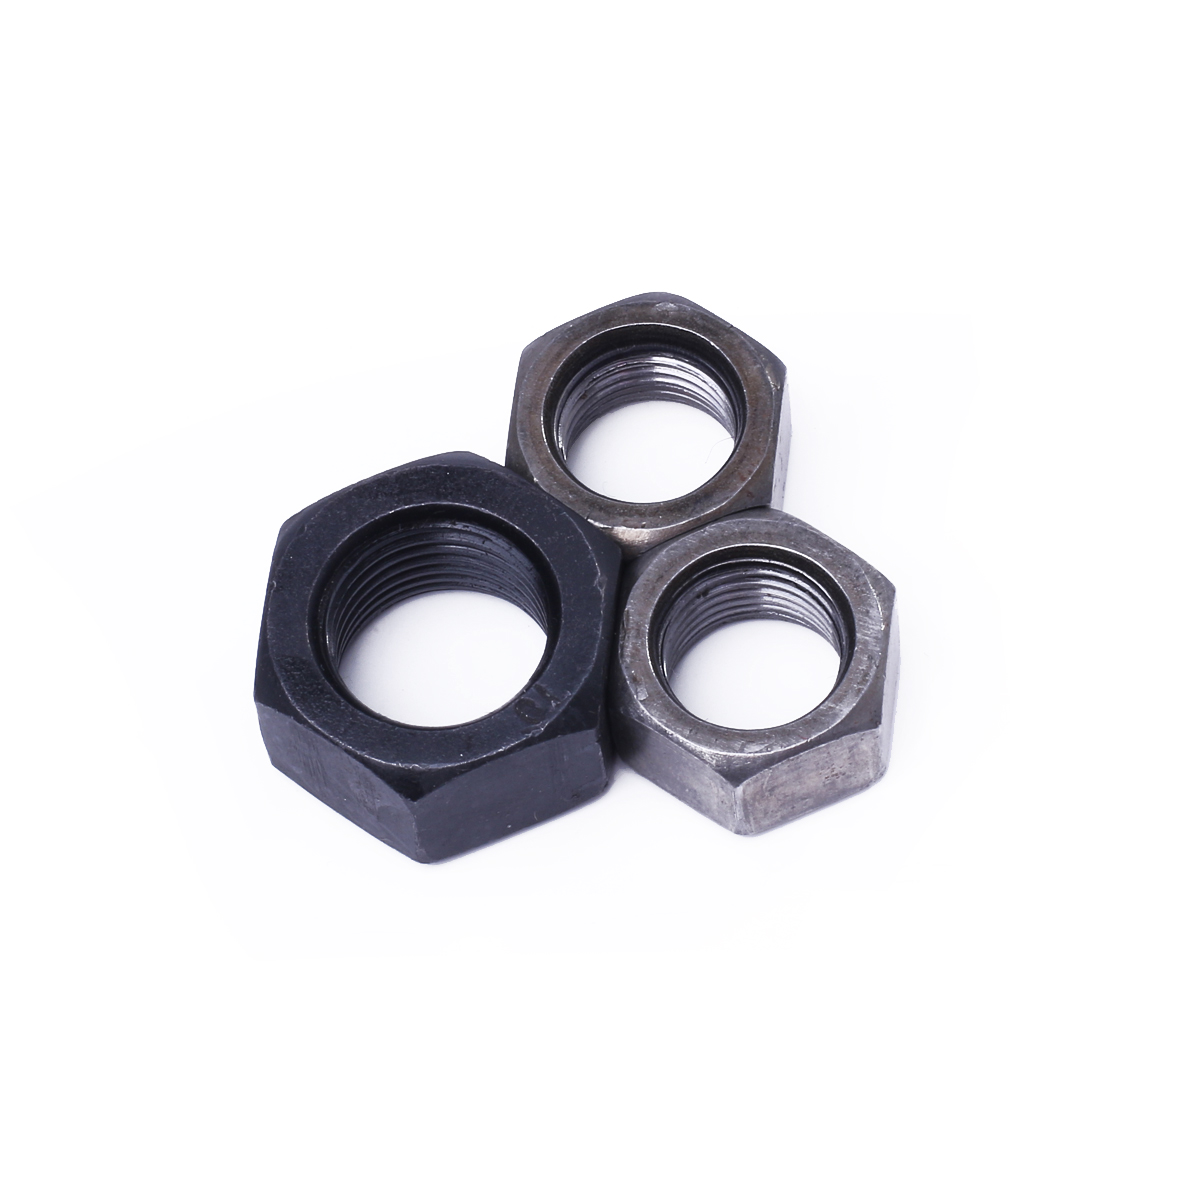 2019 High quality Grade 10.9 Hex Bolts And Nuts Din 931 - Hex nut – Jiuhe Hengye